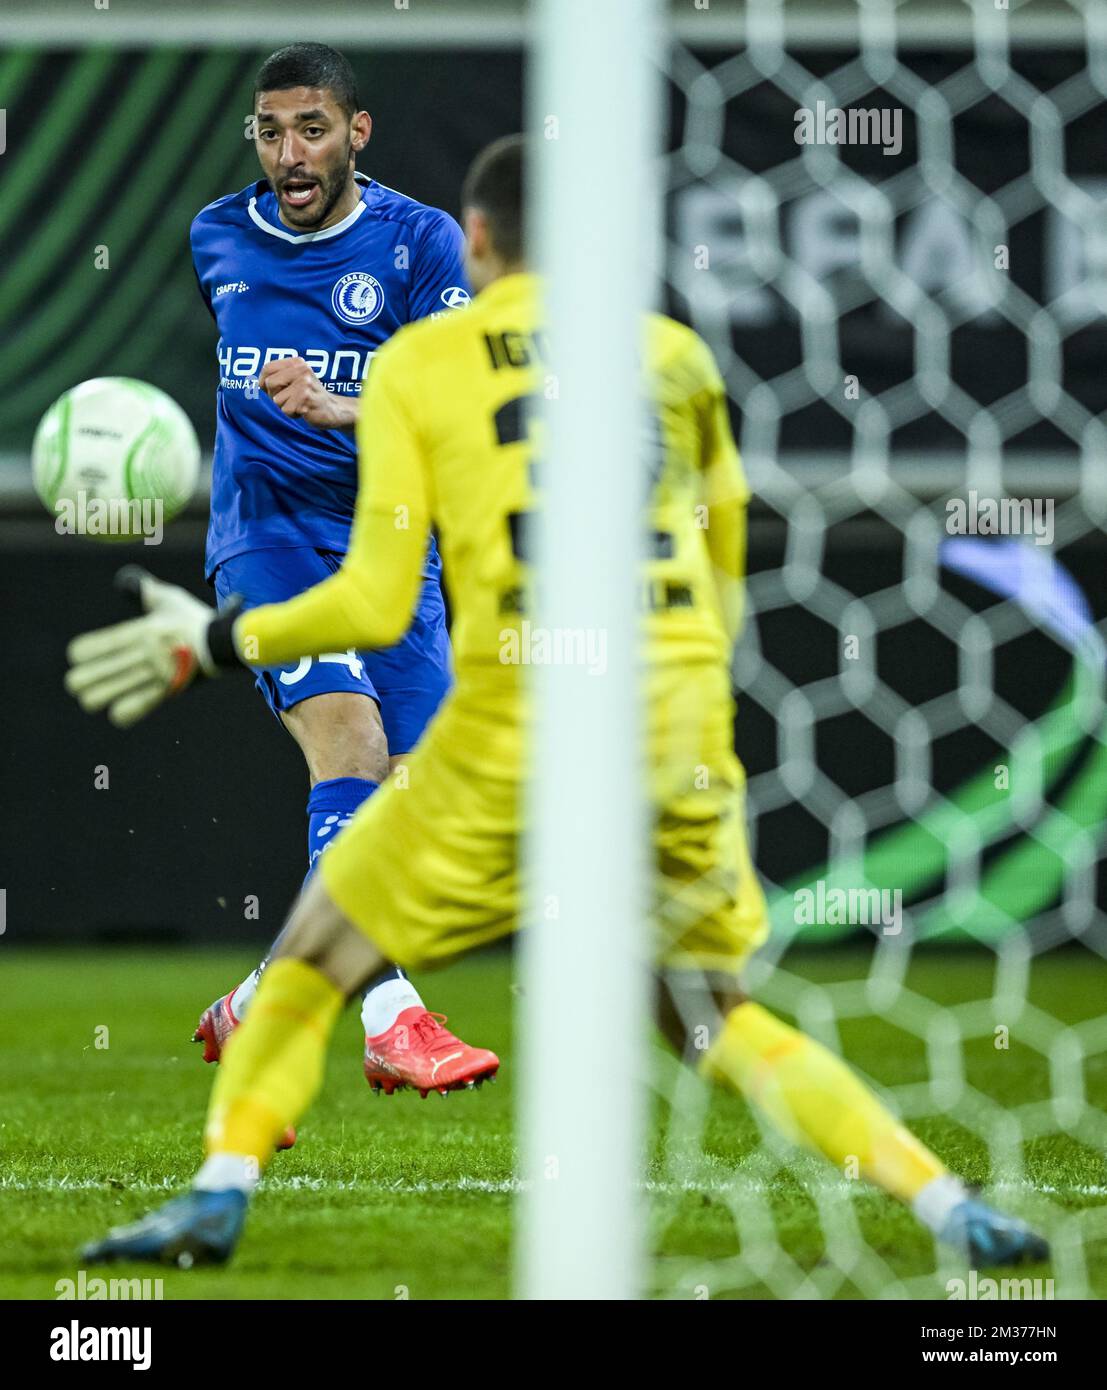 Gent's Tarik Tissoudali and Flora's goalkeeper Matvei Igonen fight for the ball during a UEFA Conference League game between Belgian soccer team KAA Gent and Estonian soccer team FC Flora Tallinn, Thursday 09 December 2021 in Gent on the sixth and last day of the UEFA Conference League group stage, in group B. BELGA PHOTO JASPER JACOBS Stock Photo